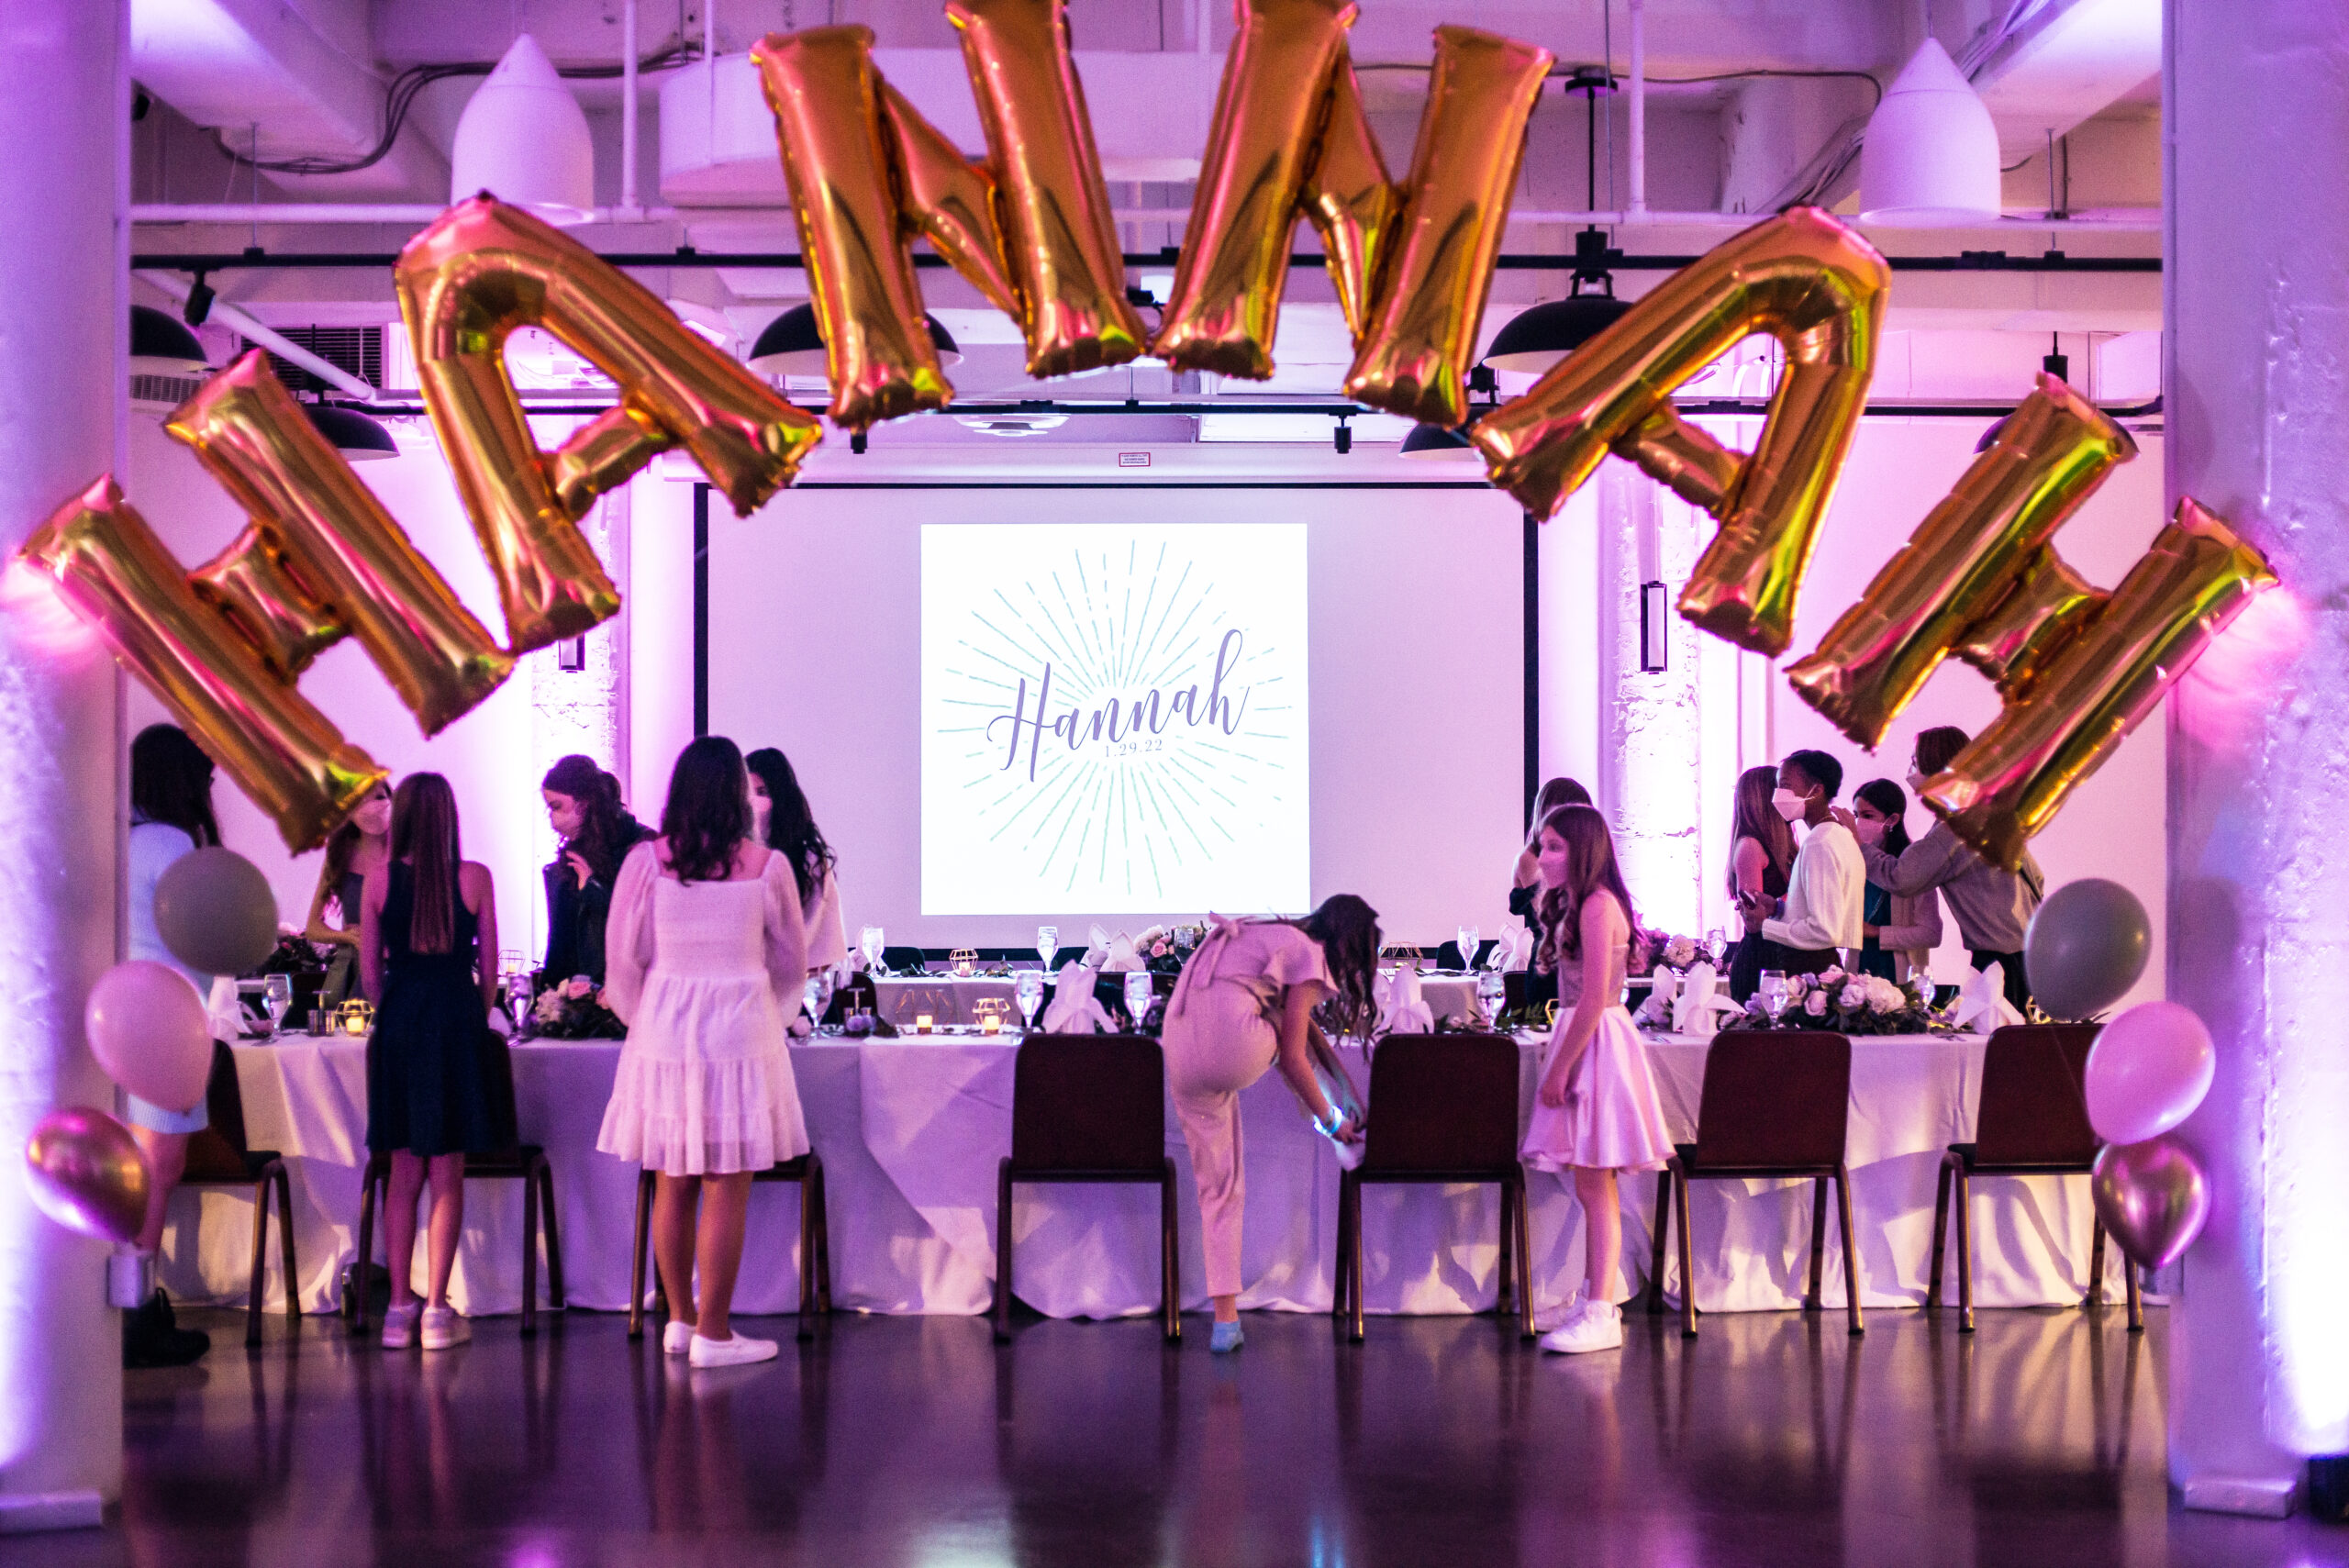 Balloons at Hannah's Sophisticated Bat Mitzvah Soiree at Eaton DC | Pop Color Events | Adding a Pop of Color to Bar & Bat Mitzvahs in DC, MD & VA | Photo by: Jacie Lee Almira Photography